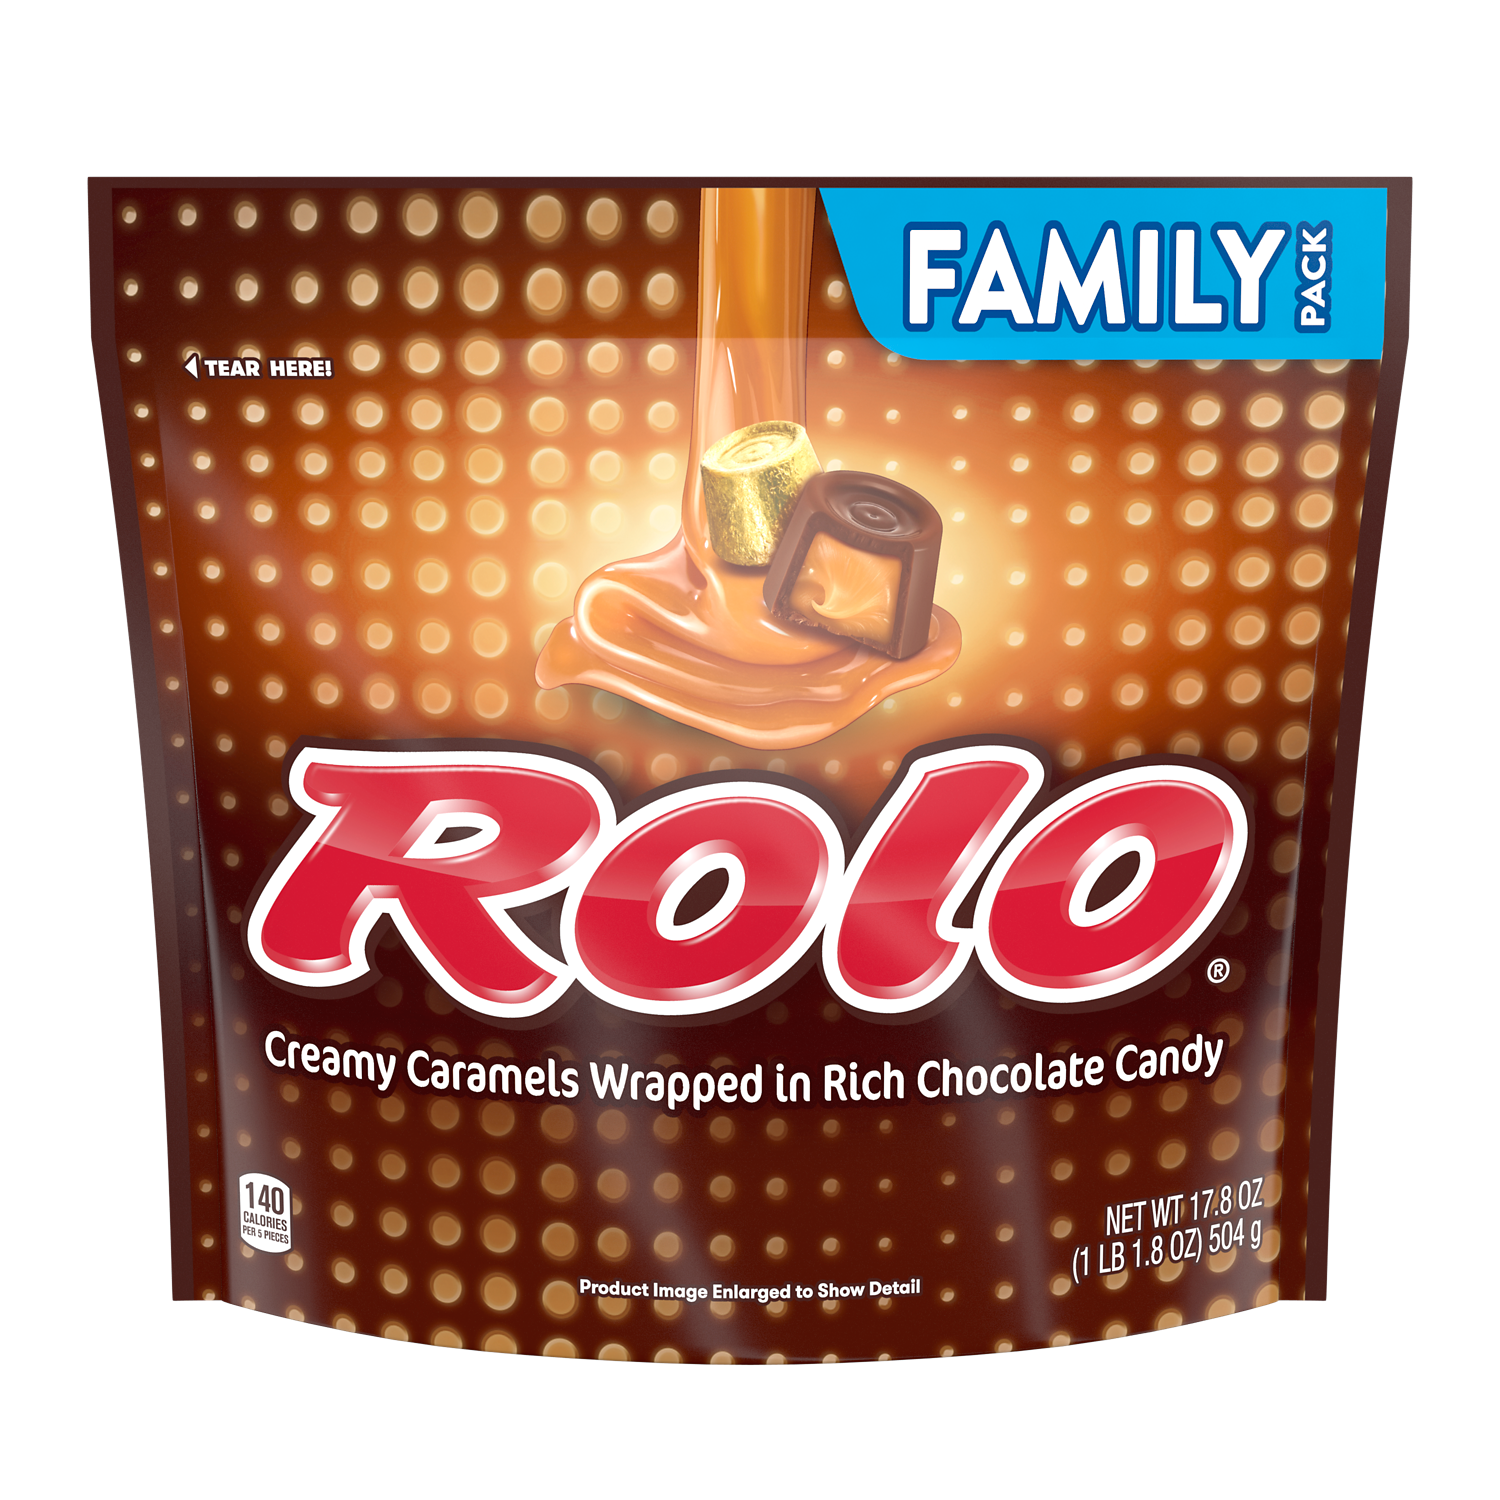 ROLO® Creamy Caramels in Rich Chocolate Candy, 17.8 oz bag - Front of Package